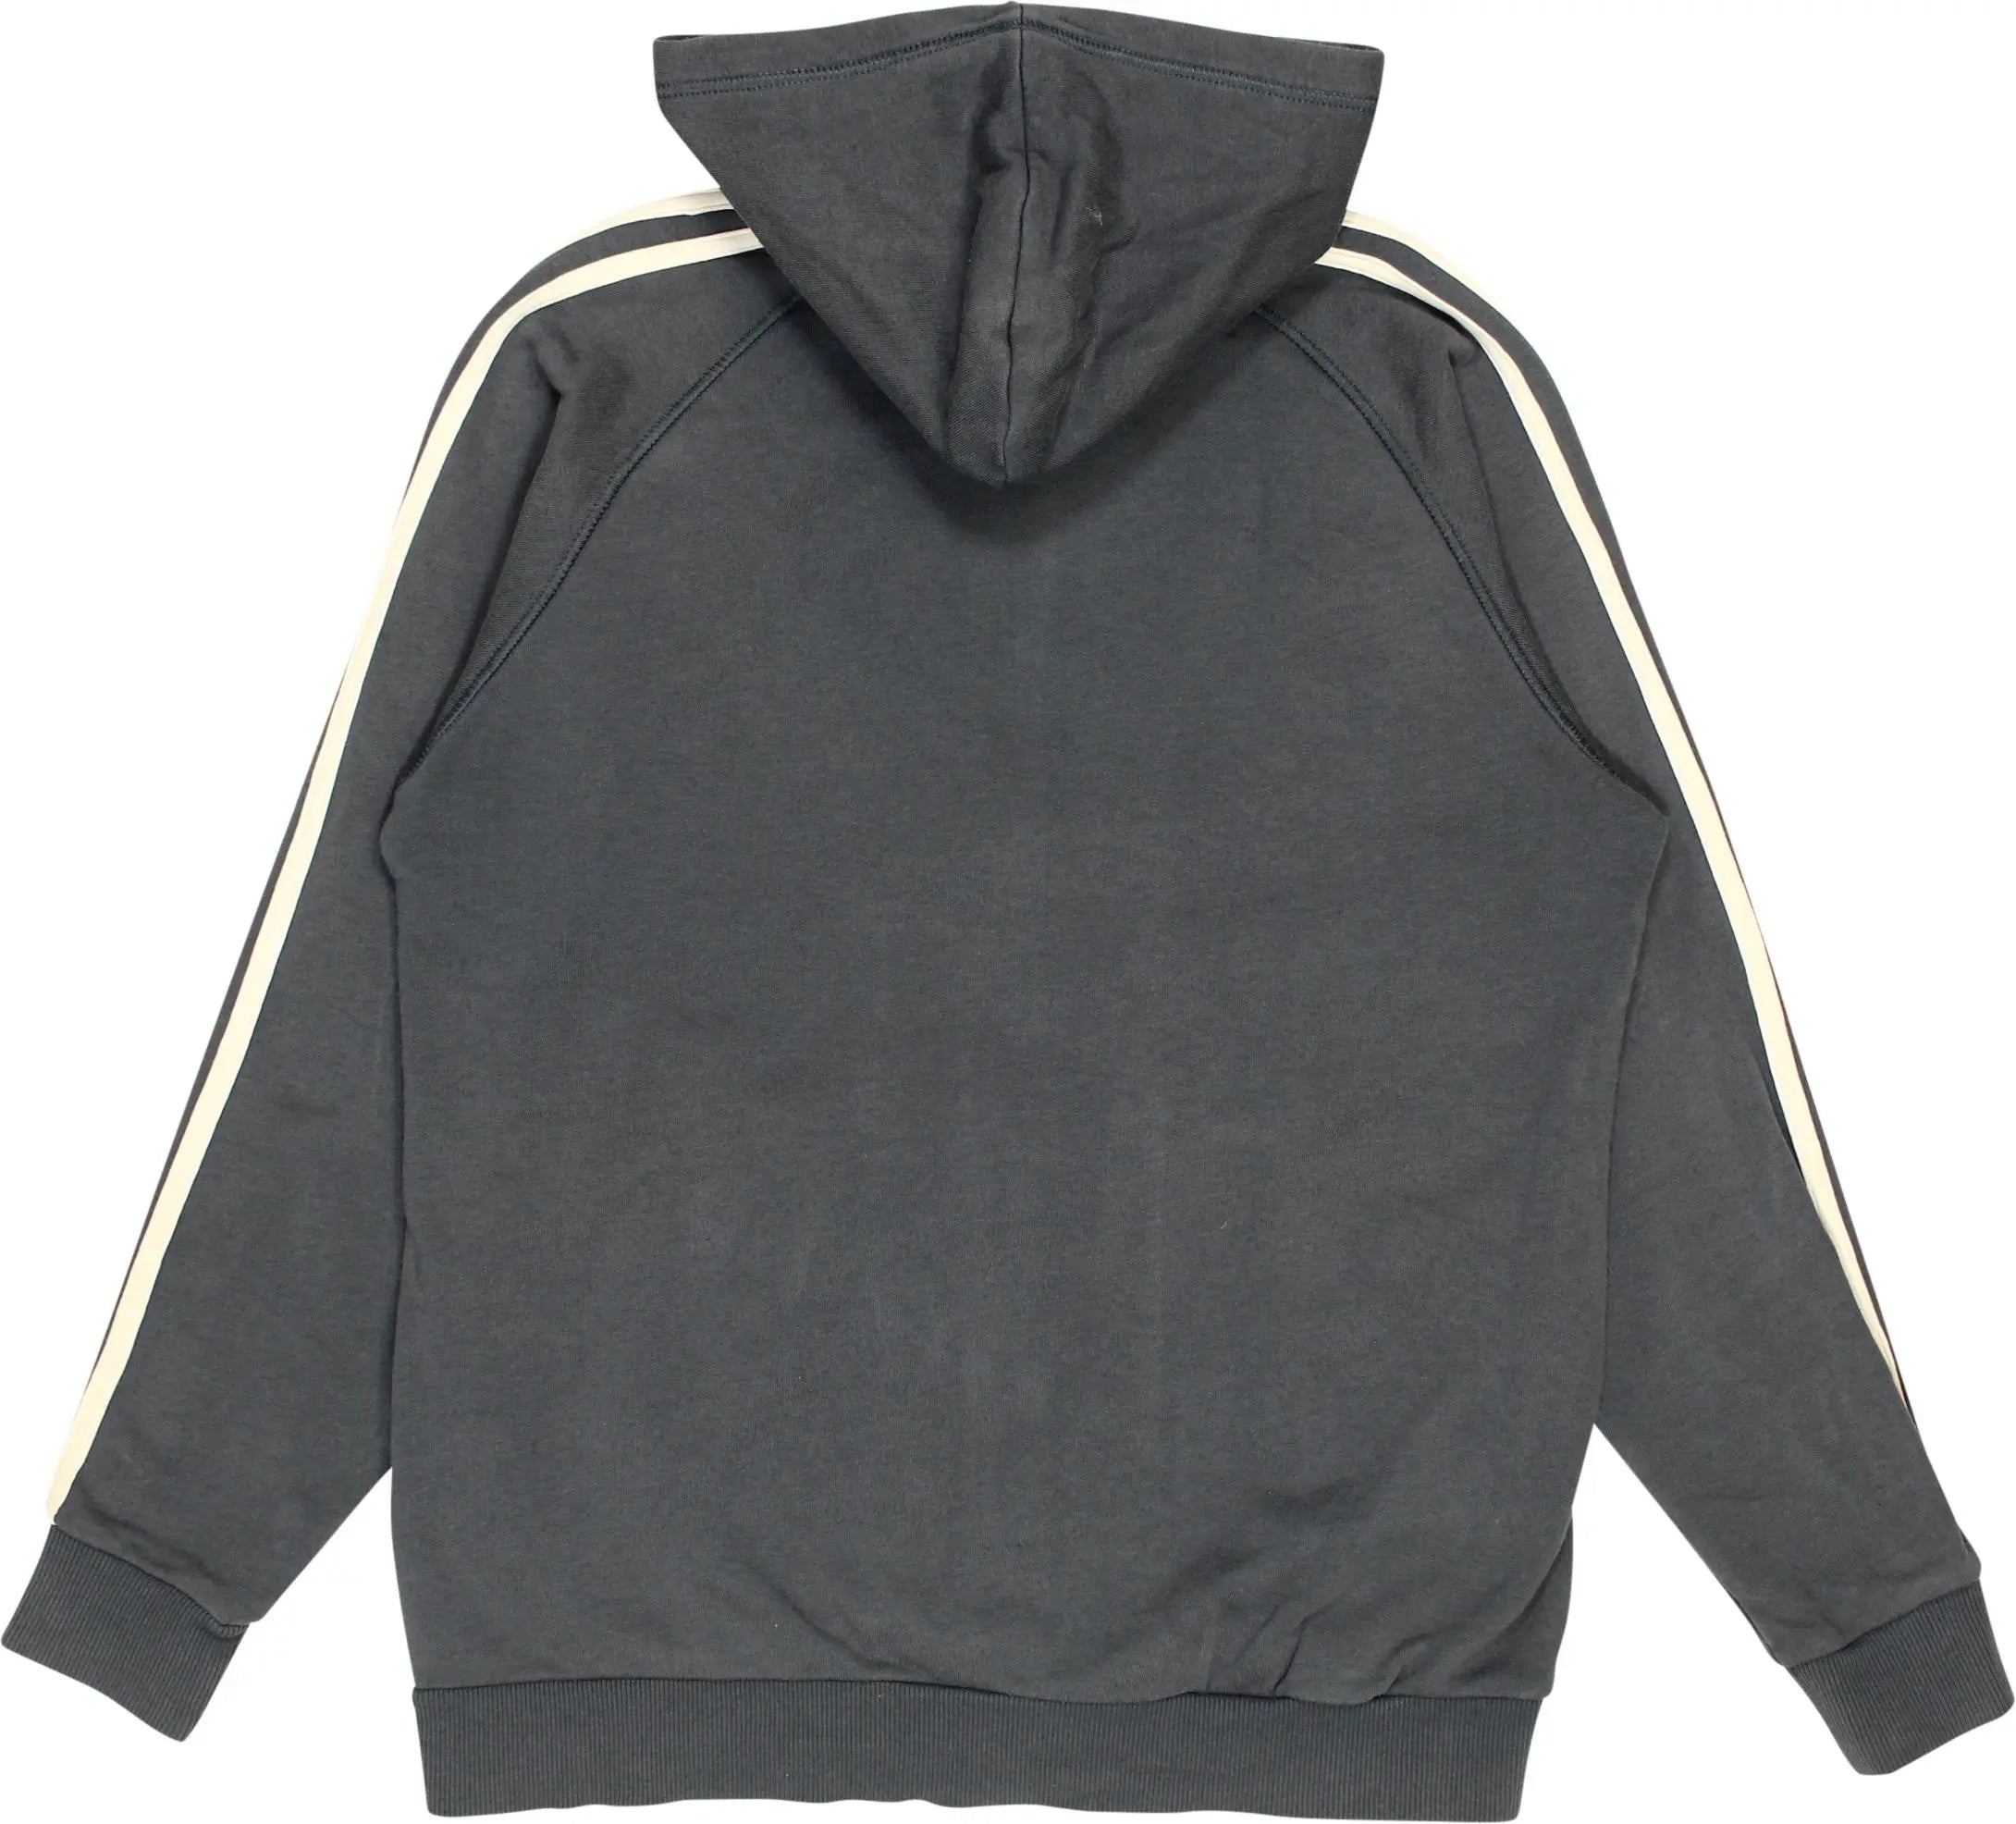 Adidas - Grey Zip-up Hoodie by Adidas- ThriftTale.com - Vintage and second handclothing